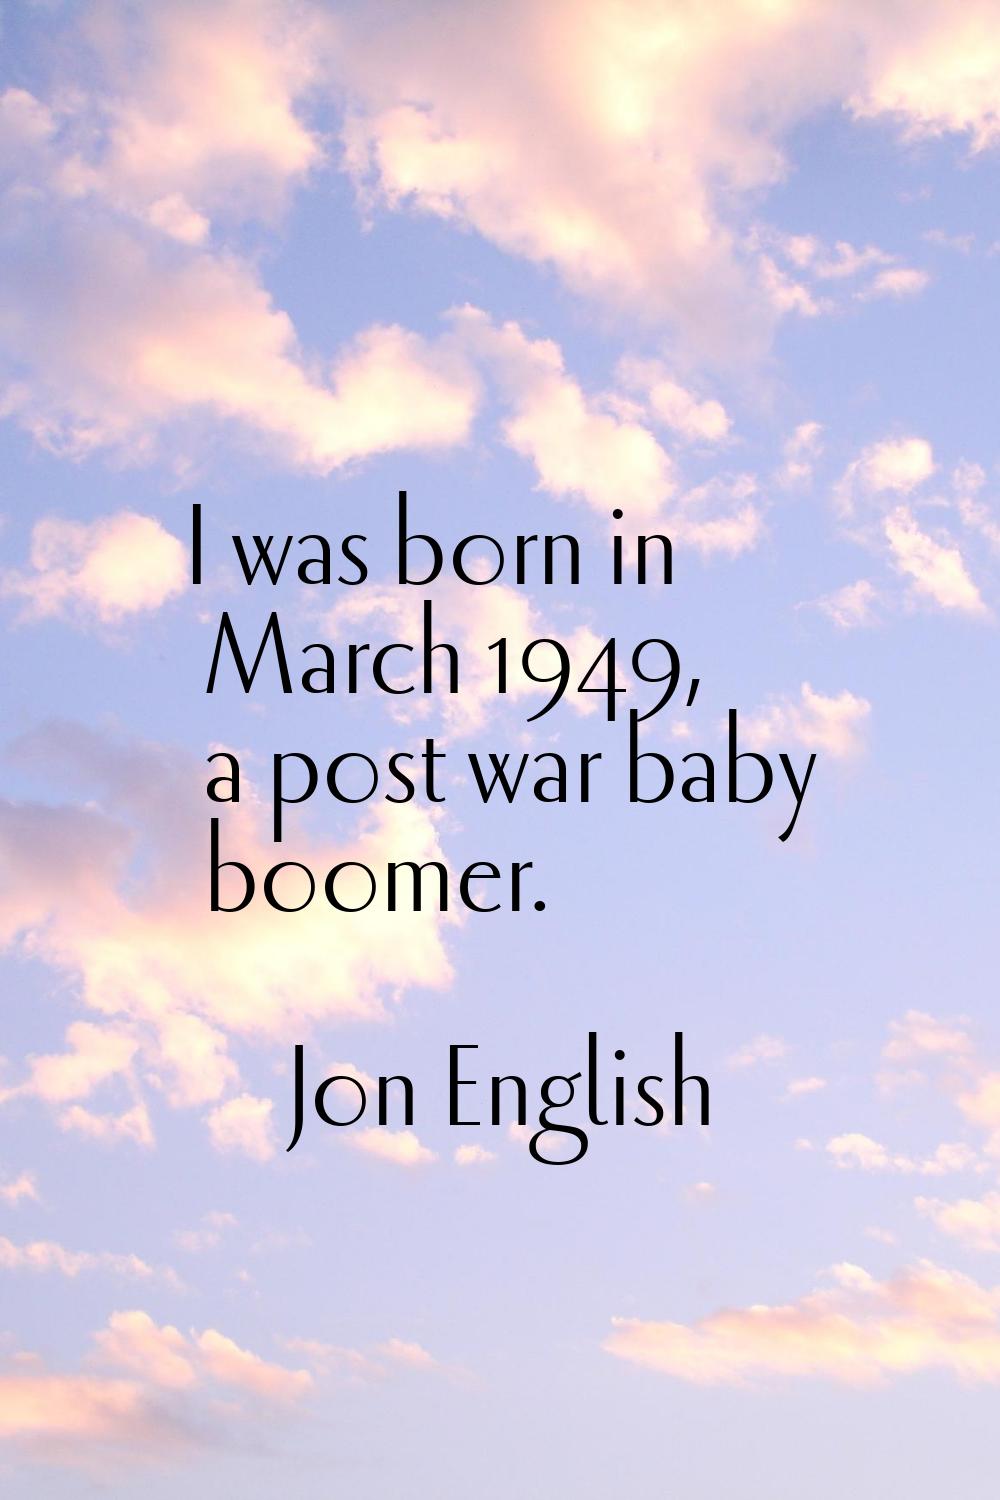 I was born in March 1949, a post war baby boomer.